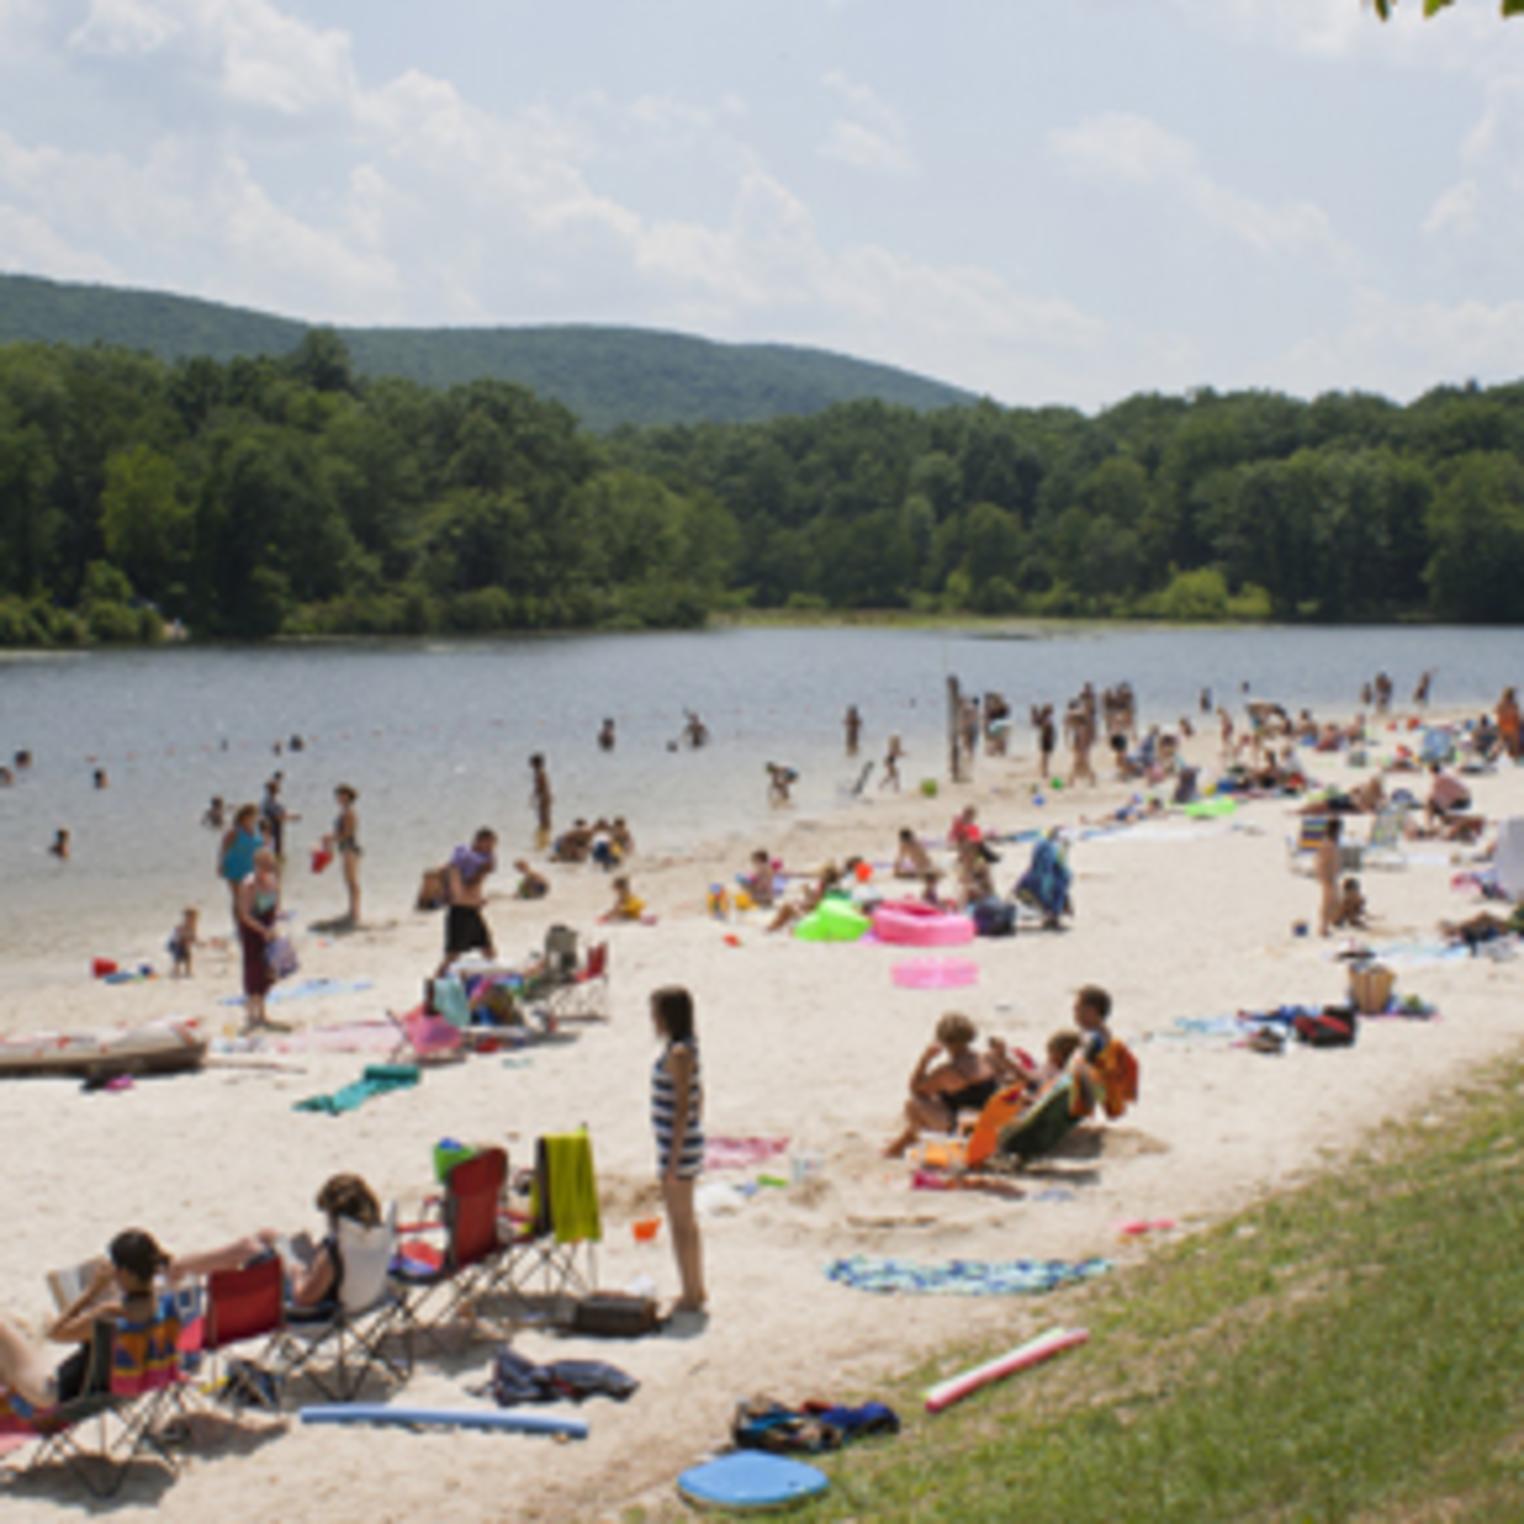 The beach at Laurel Lake in Pine Grove Furnace State Park